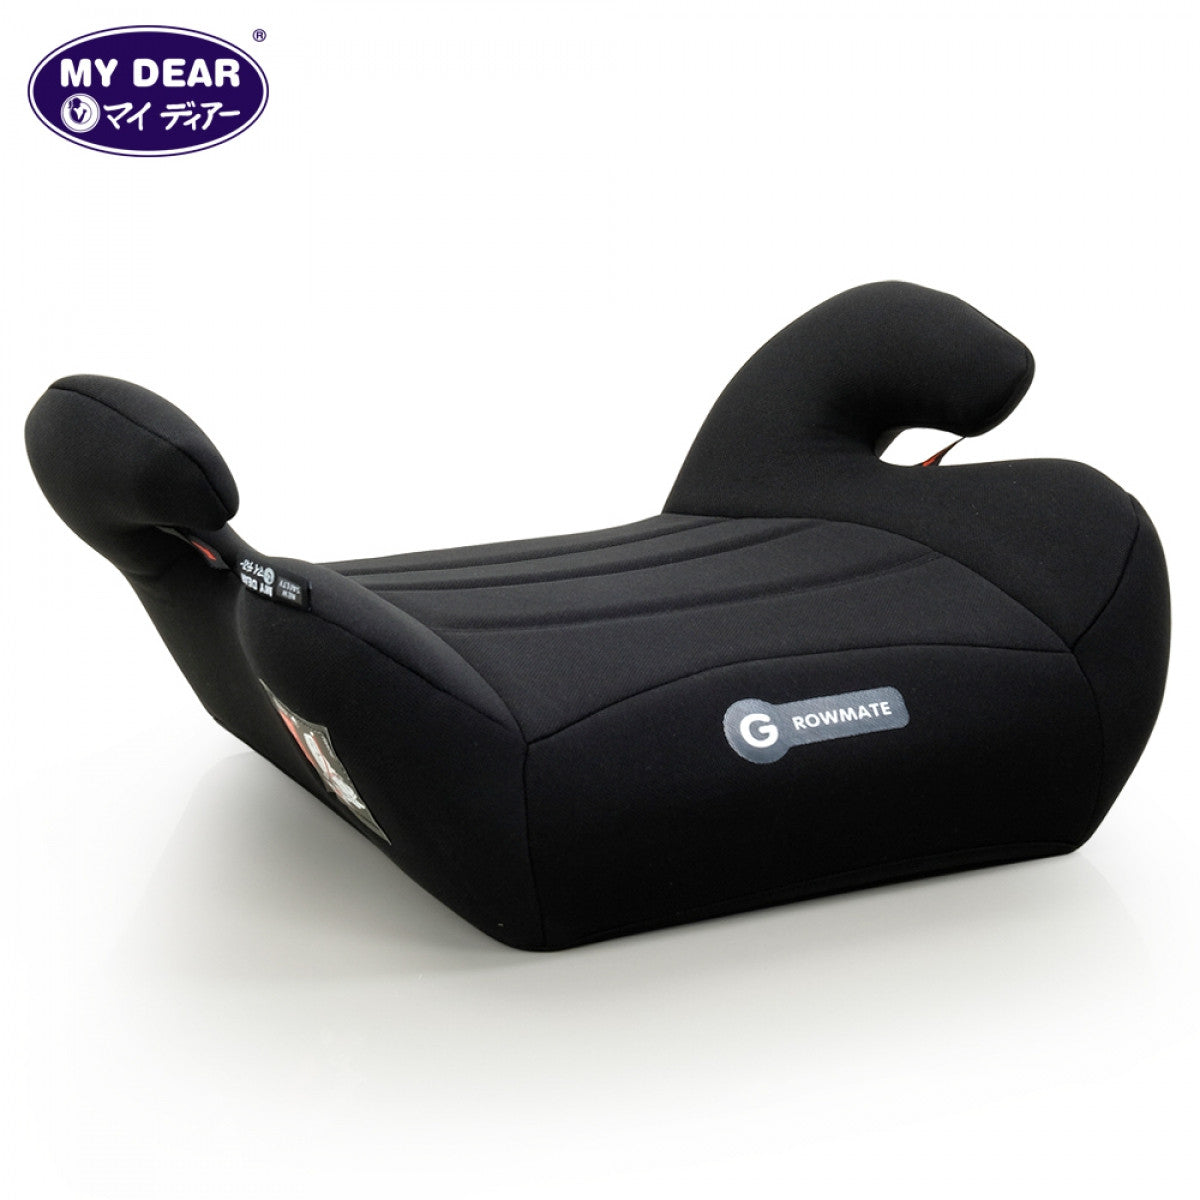 My Dear Booster Car Seat 30001 With Universal ECE R44/04 Certified